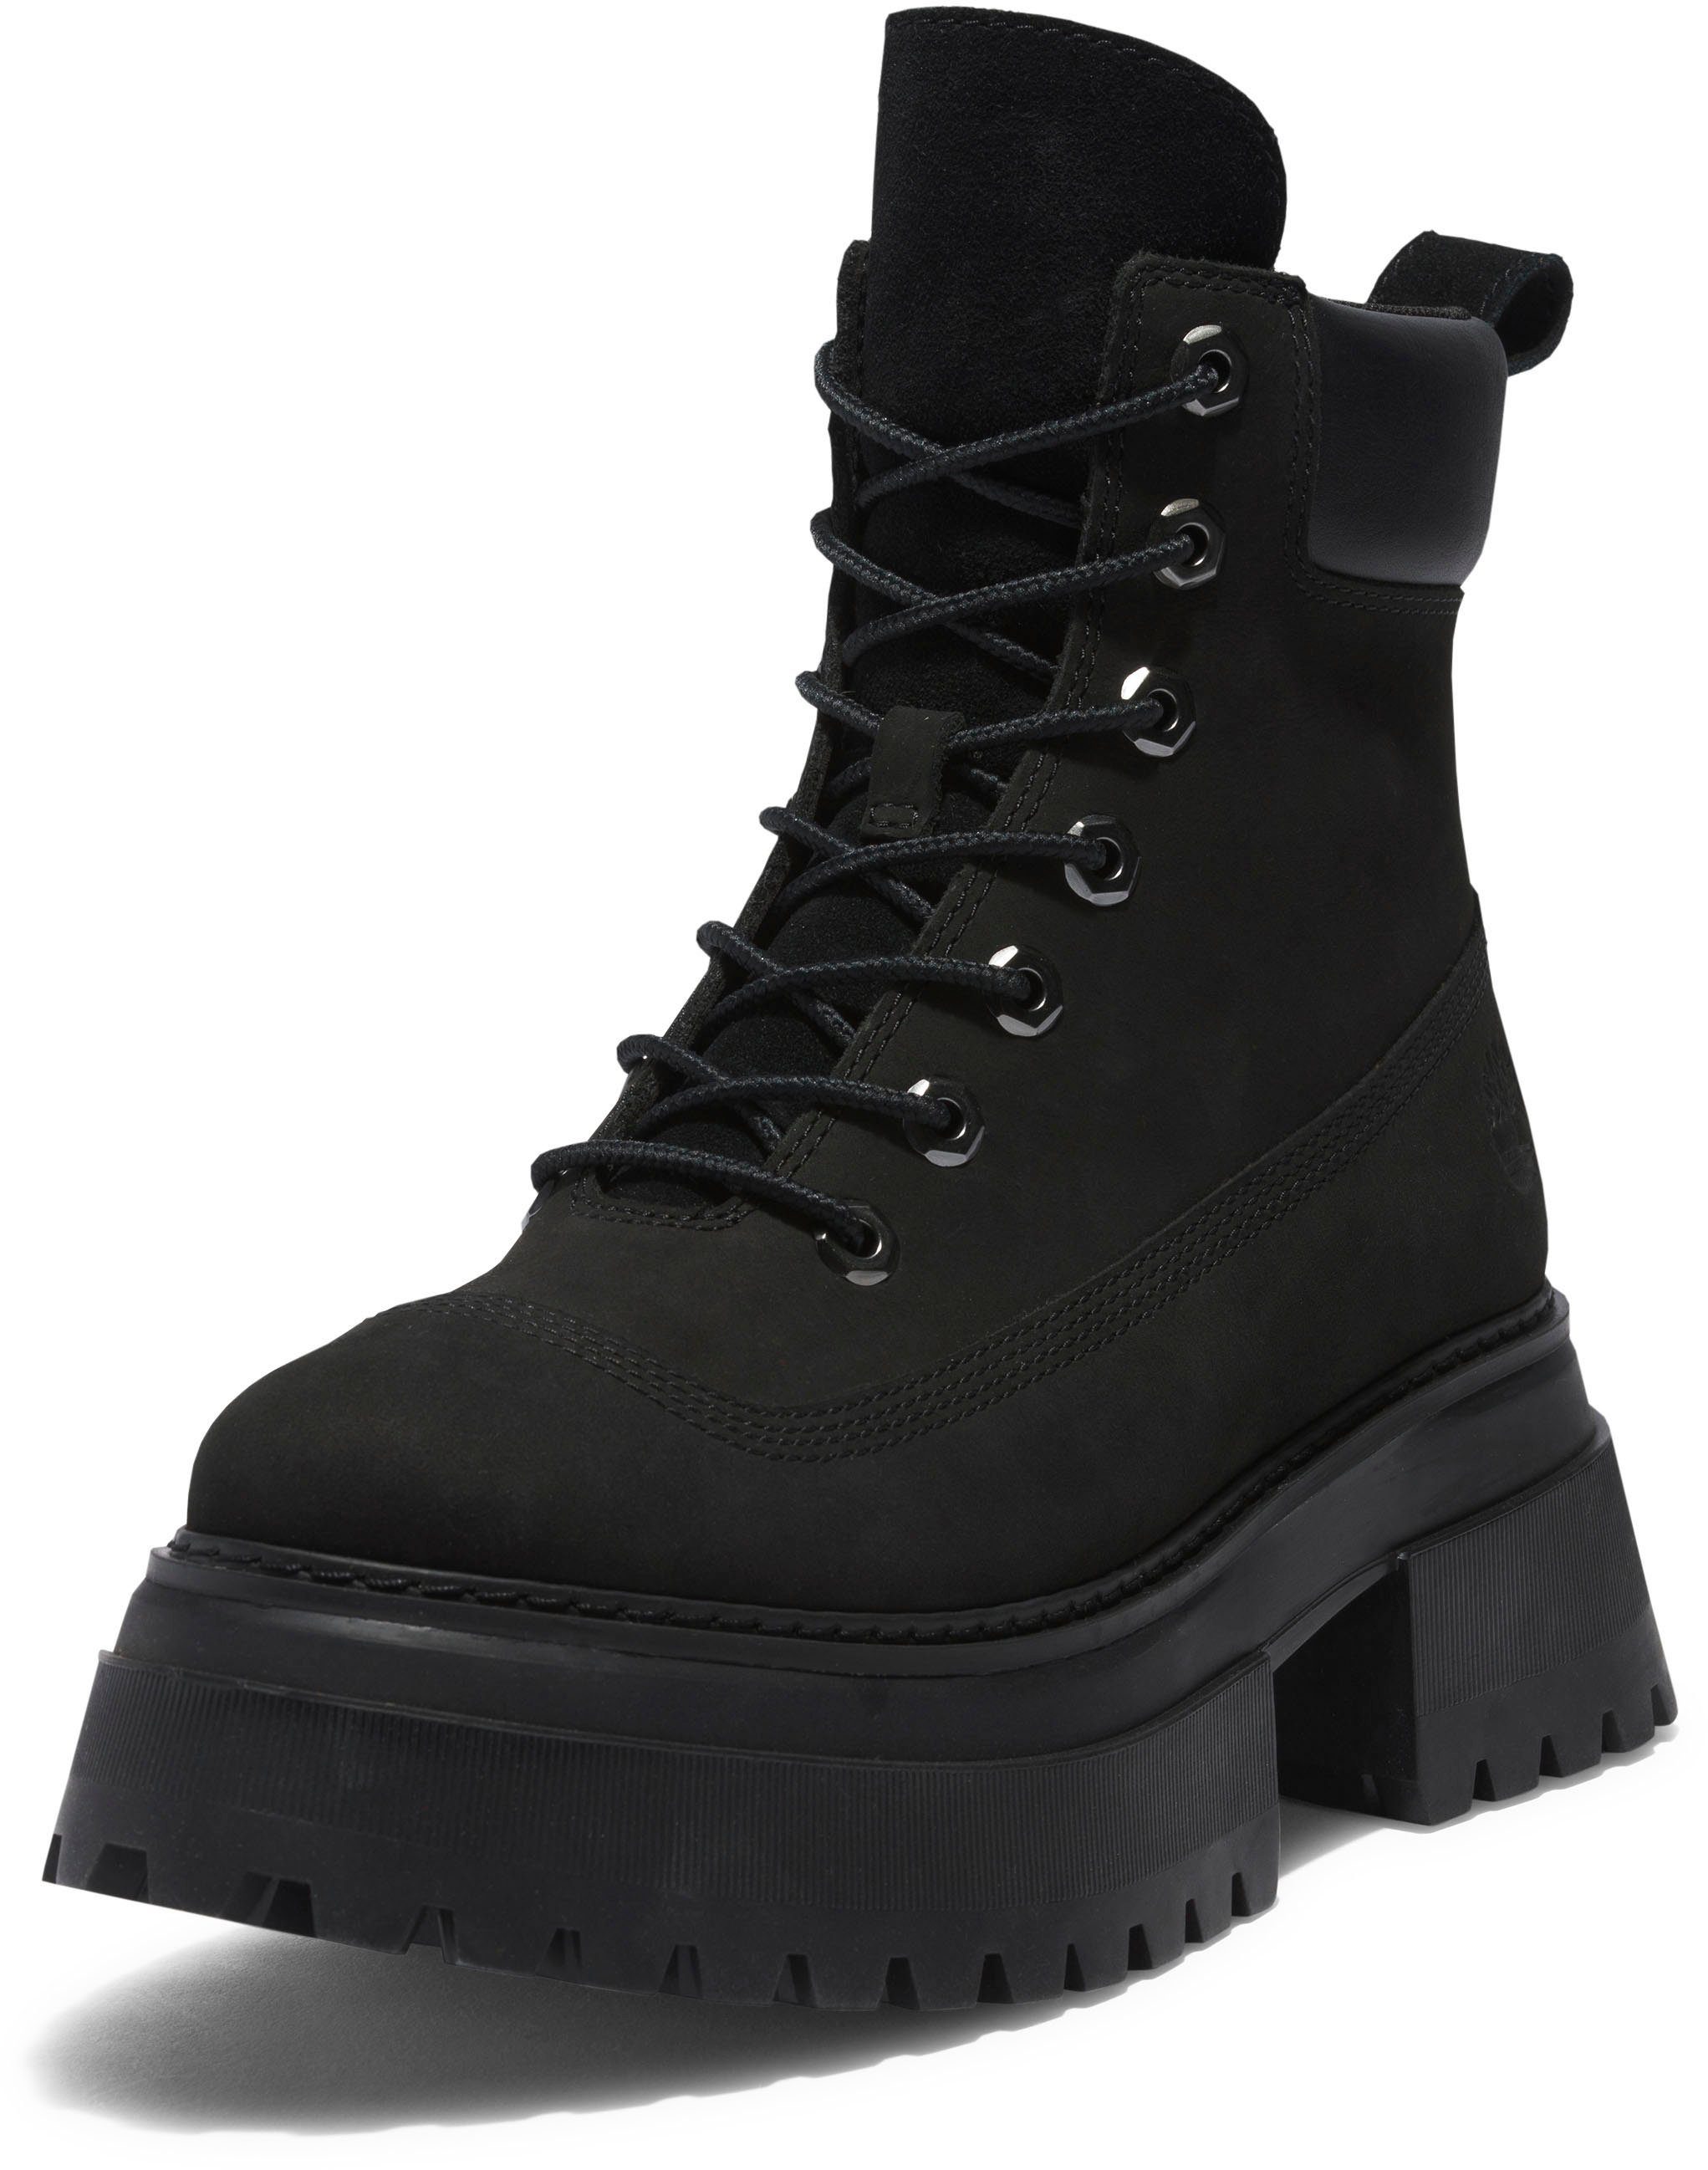 LaceUp Sky schwarz 6In Schnürboots Timberland Timberland